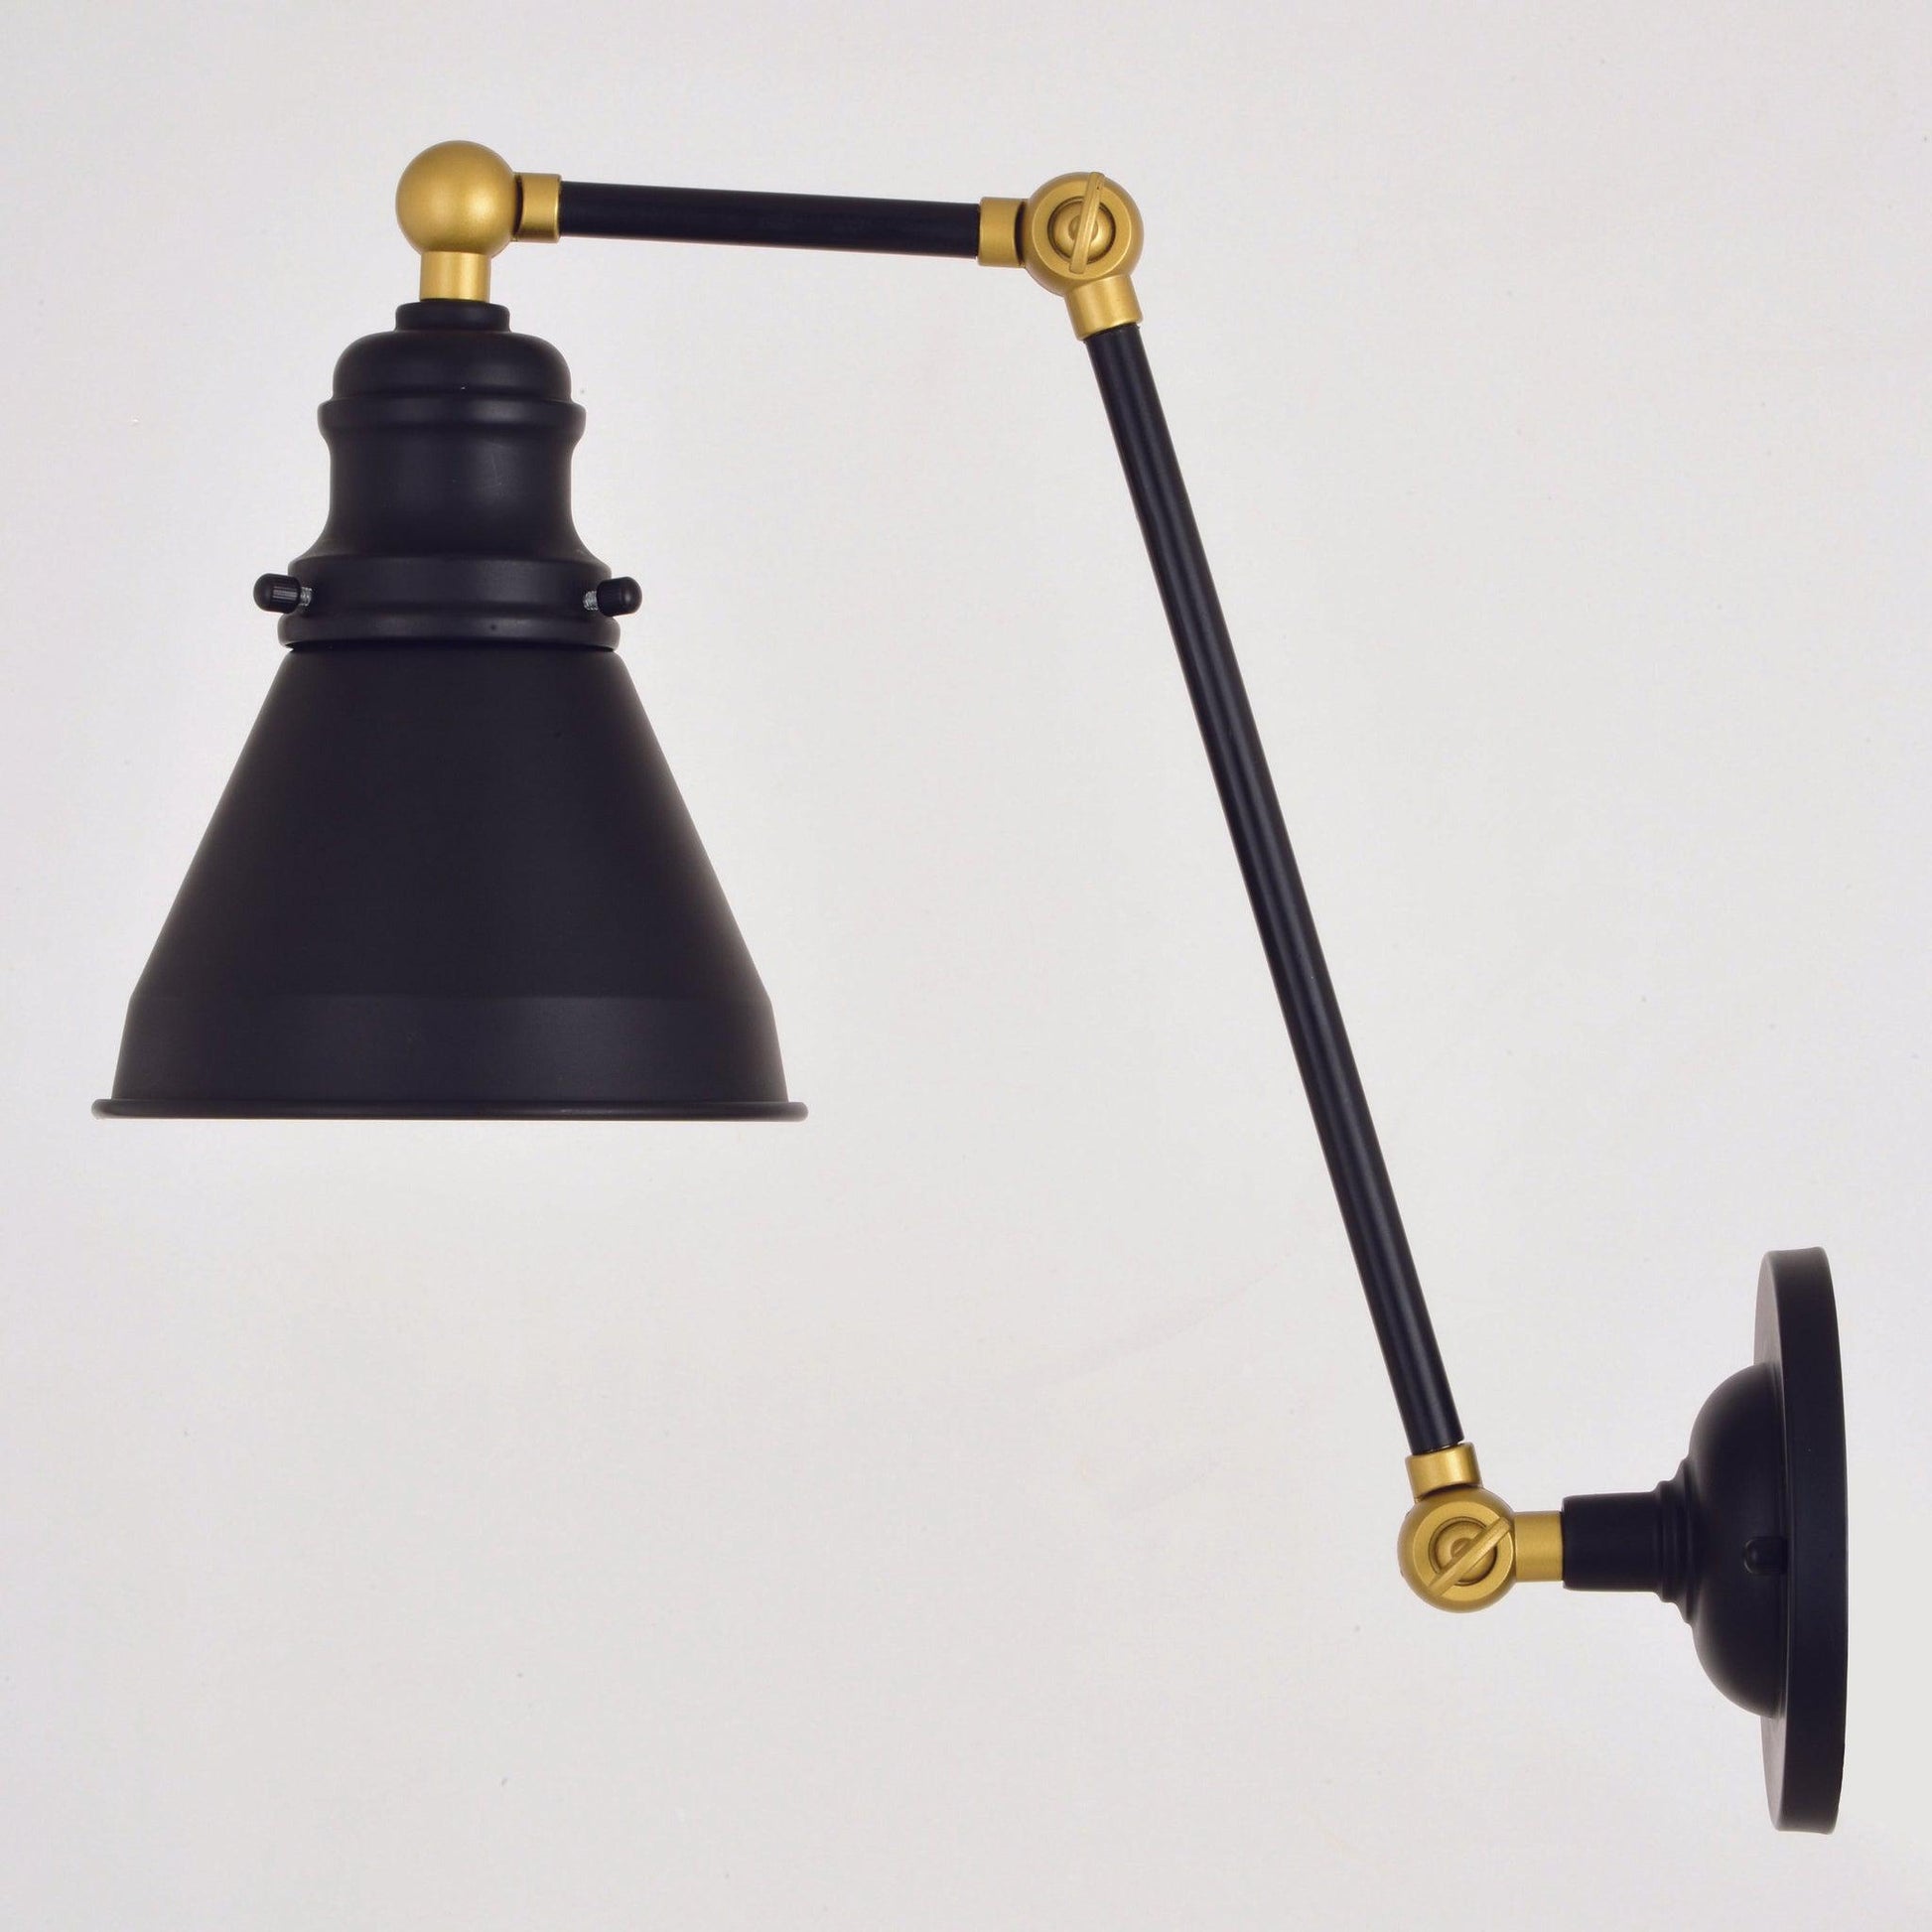 Vaxcel Alexis 6" 1-Light Oil Rubbed Bronze and Satin Gold Adjustable Swing Arm Wall Light With Metal Shade